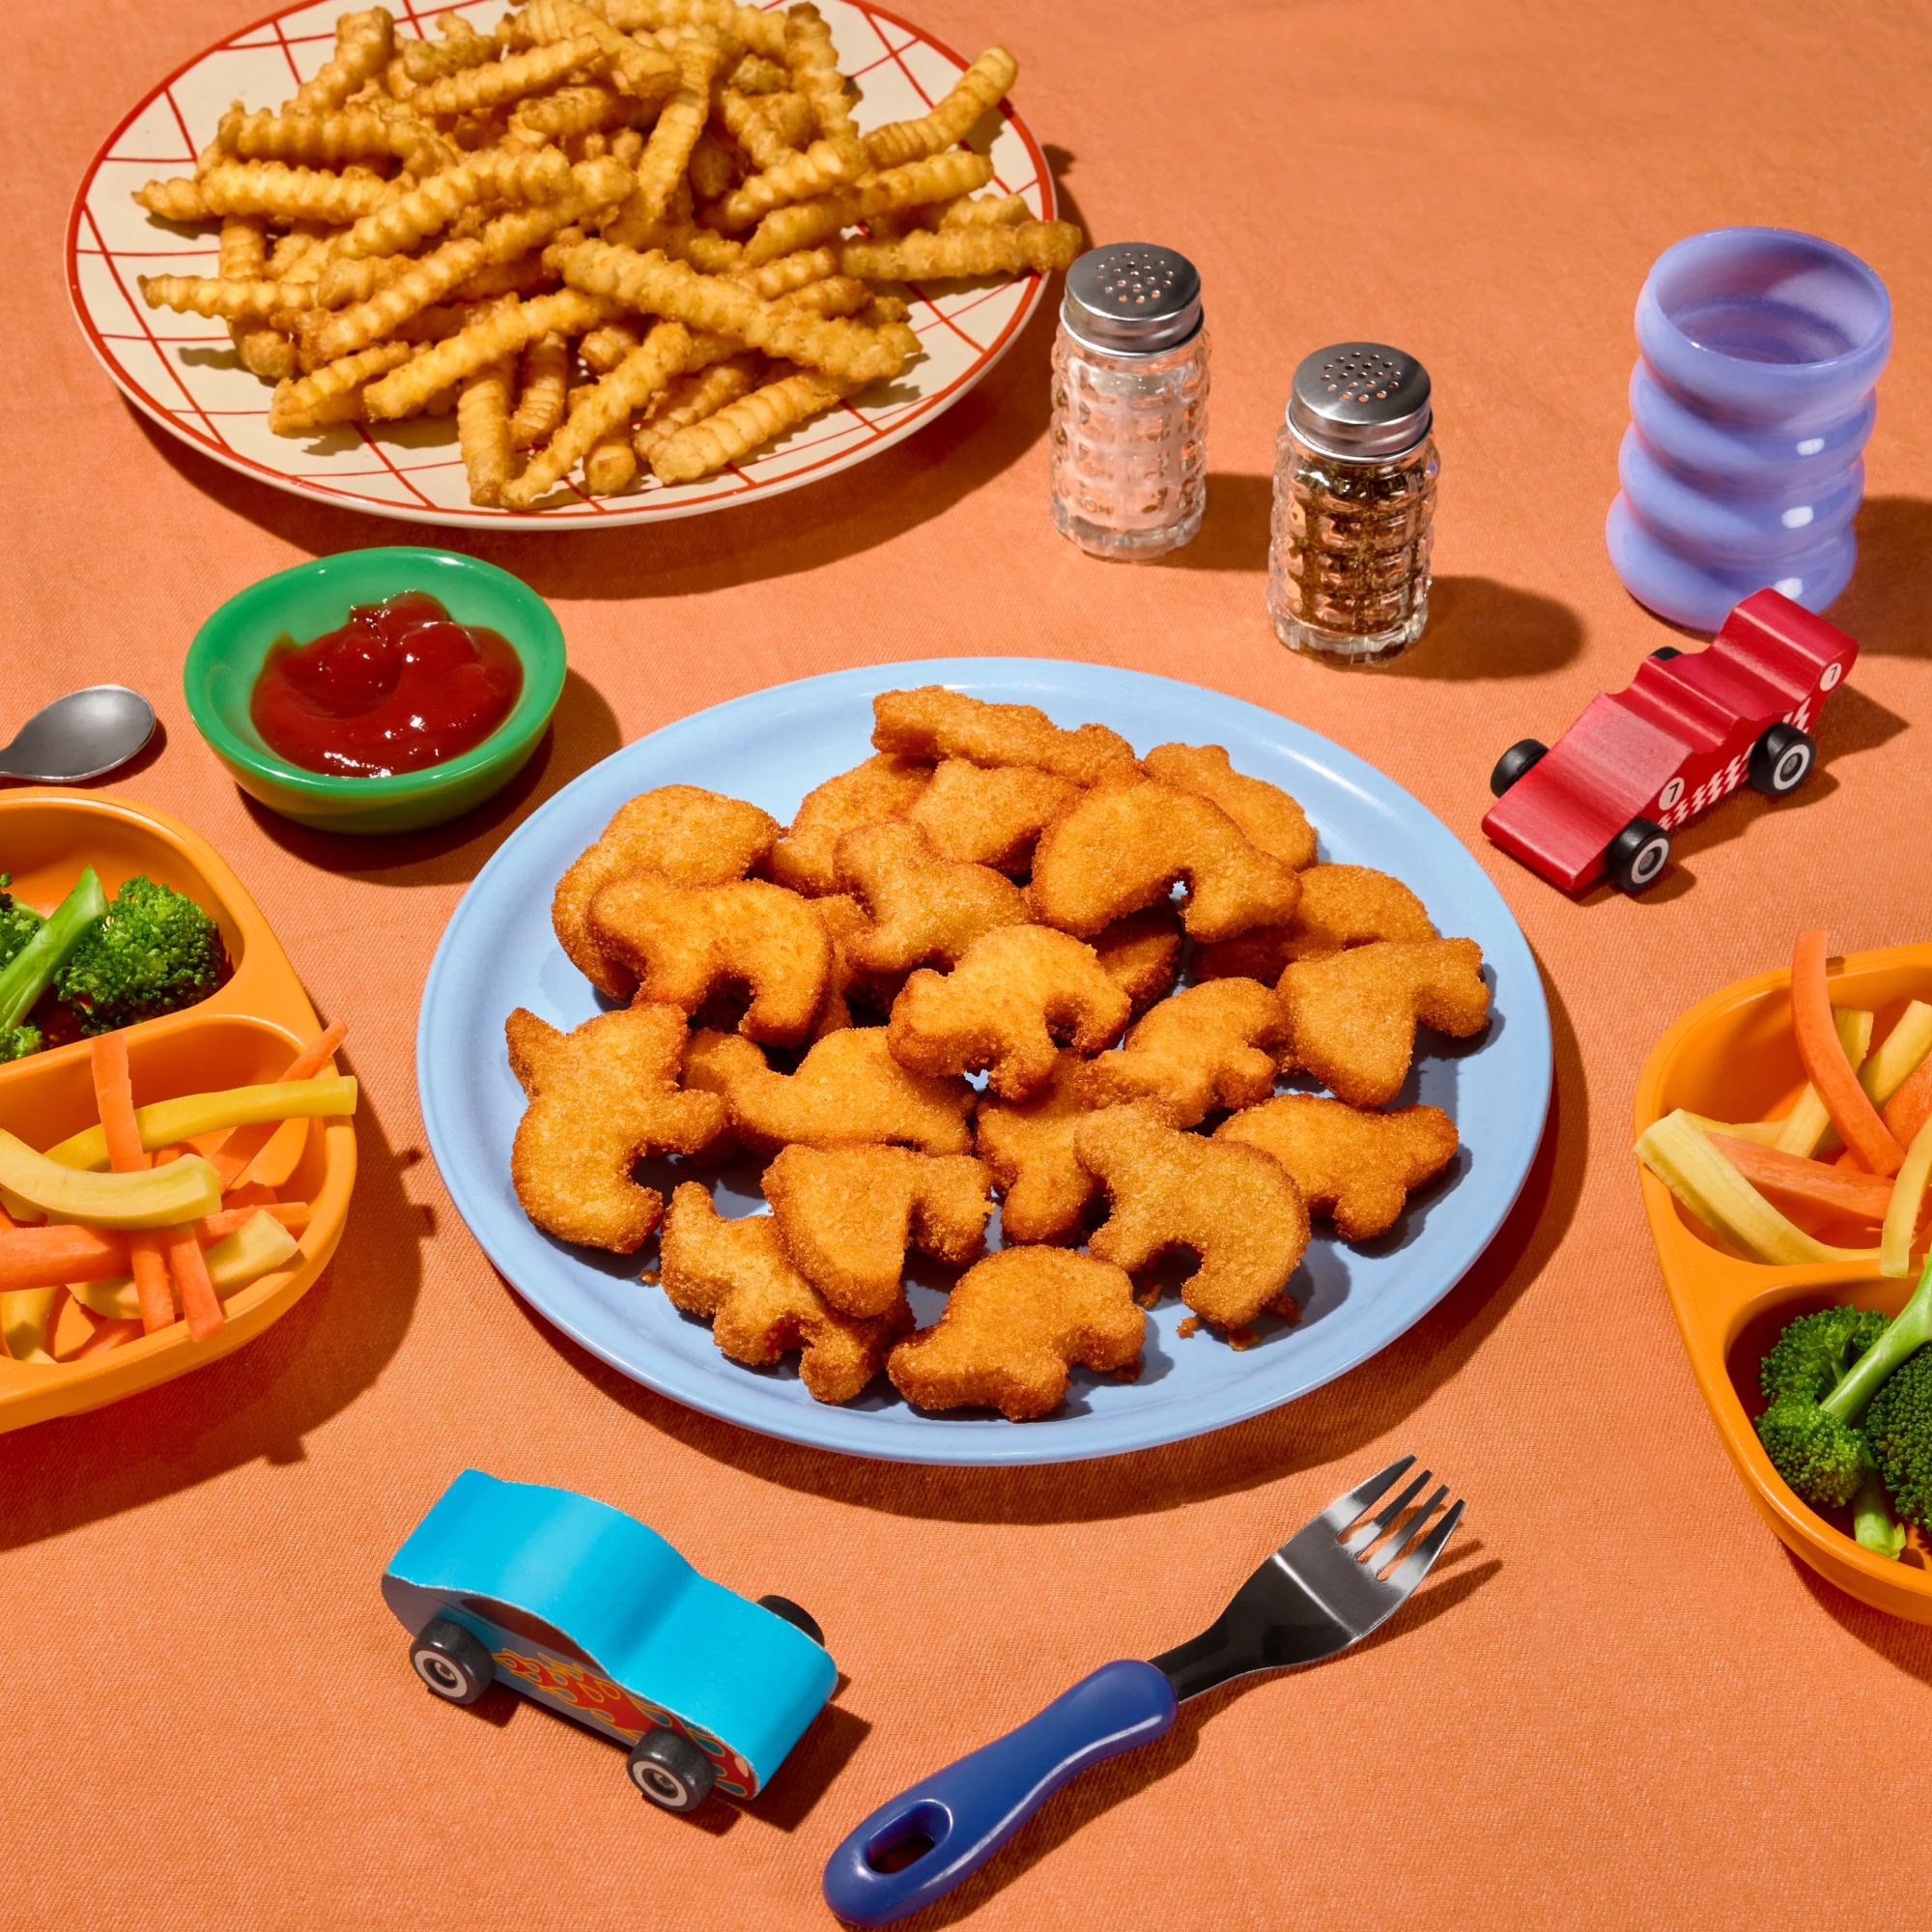 Impossible Wild Nuggies plated on a table with kids. toys